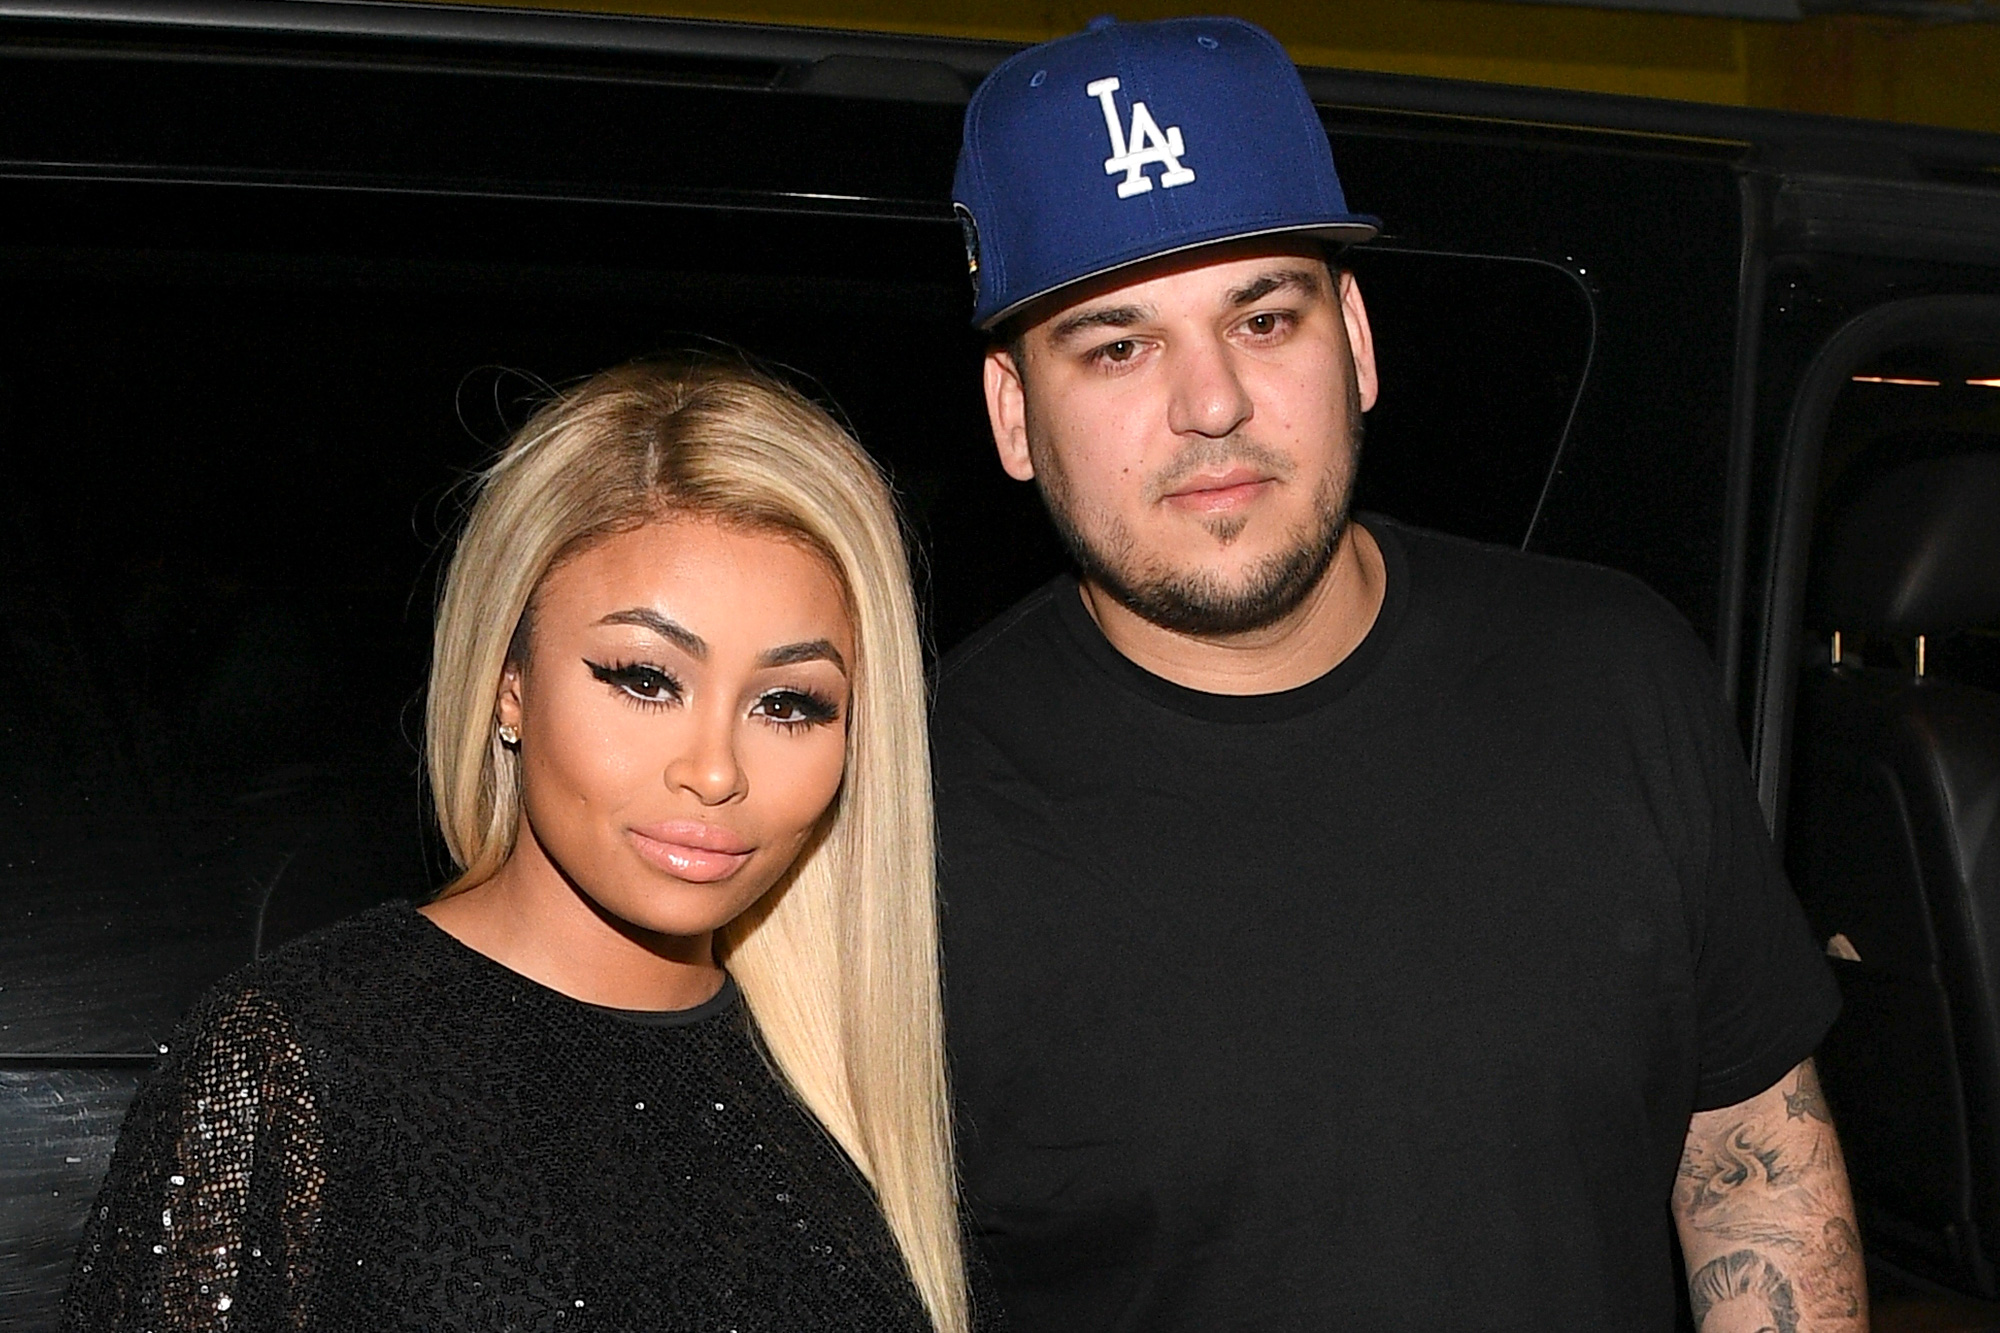 Blac Chyna says wrapping cord around Rob Kardashian's throat, grabbing gun was her 'being funny' during trial